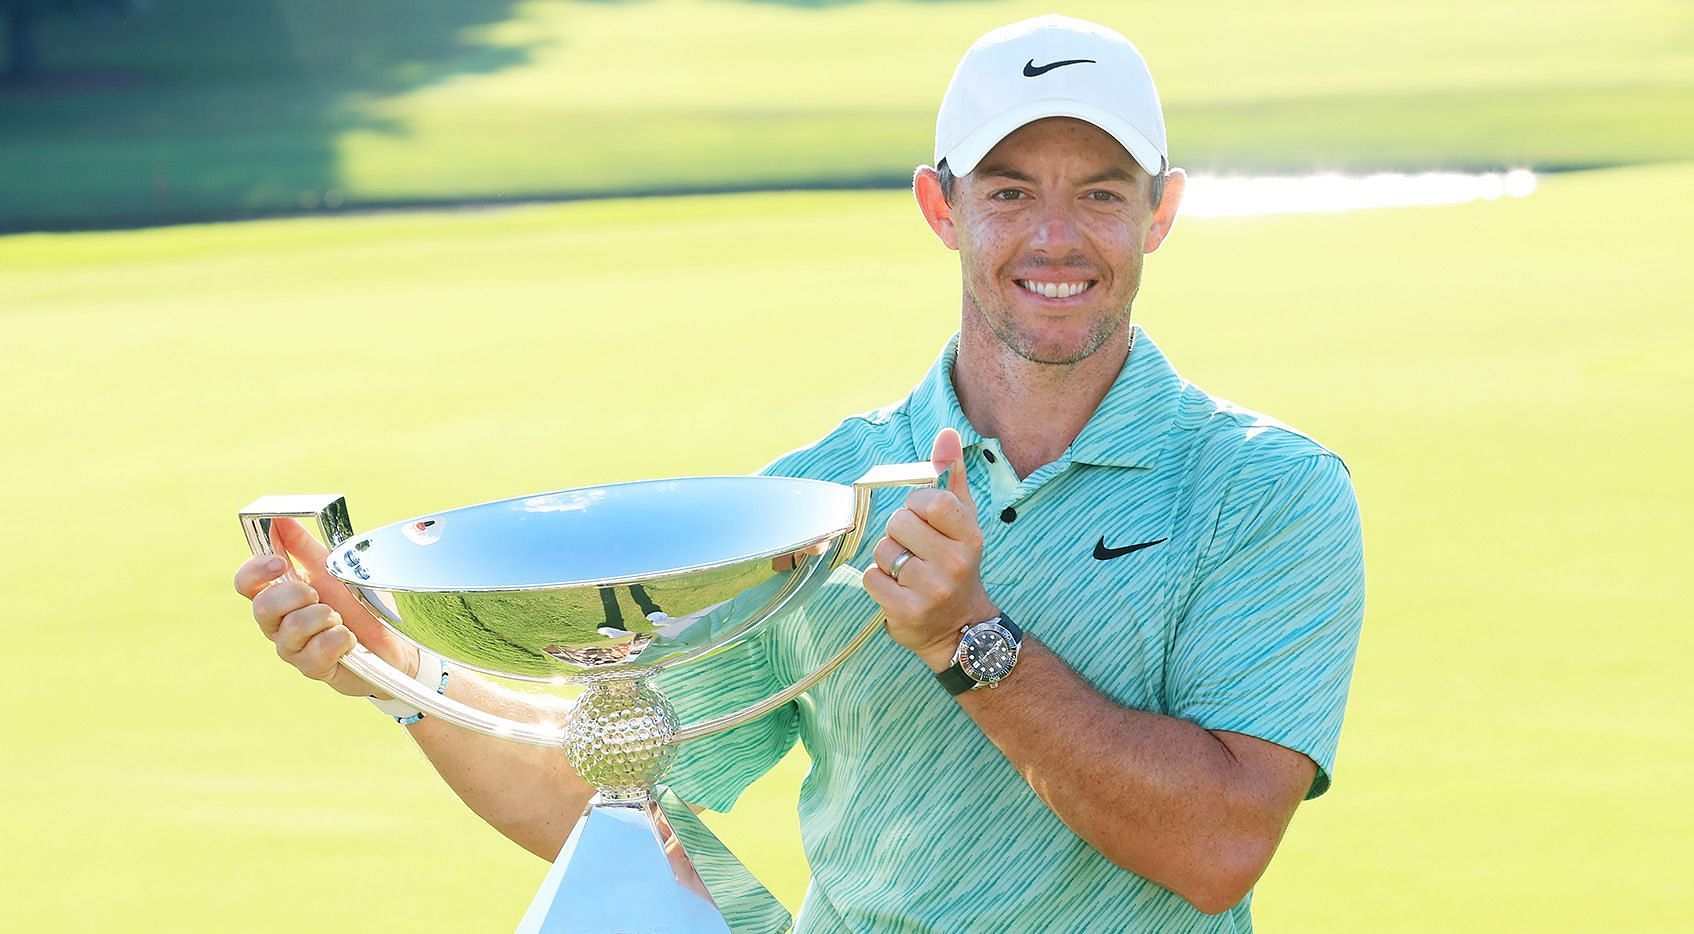 Rory McIlroy with the 2022 TOUR Championship trophy (via PGA)